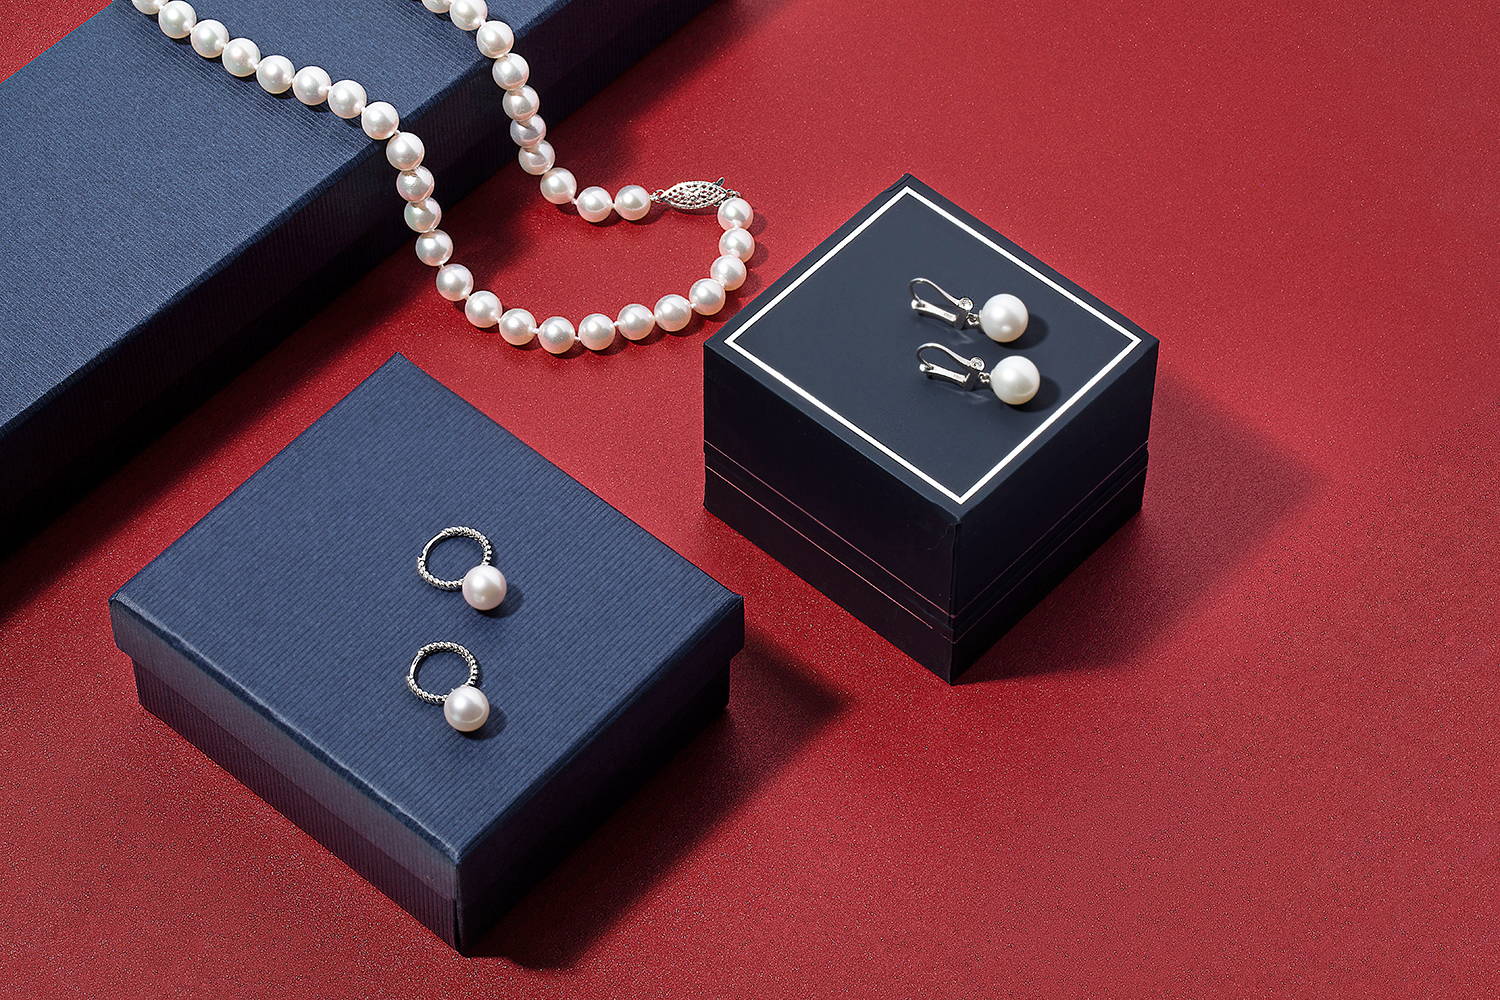 Pearl Necklaces and Earrings in Different Styles with Black Jewelry Boxes